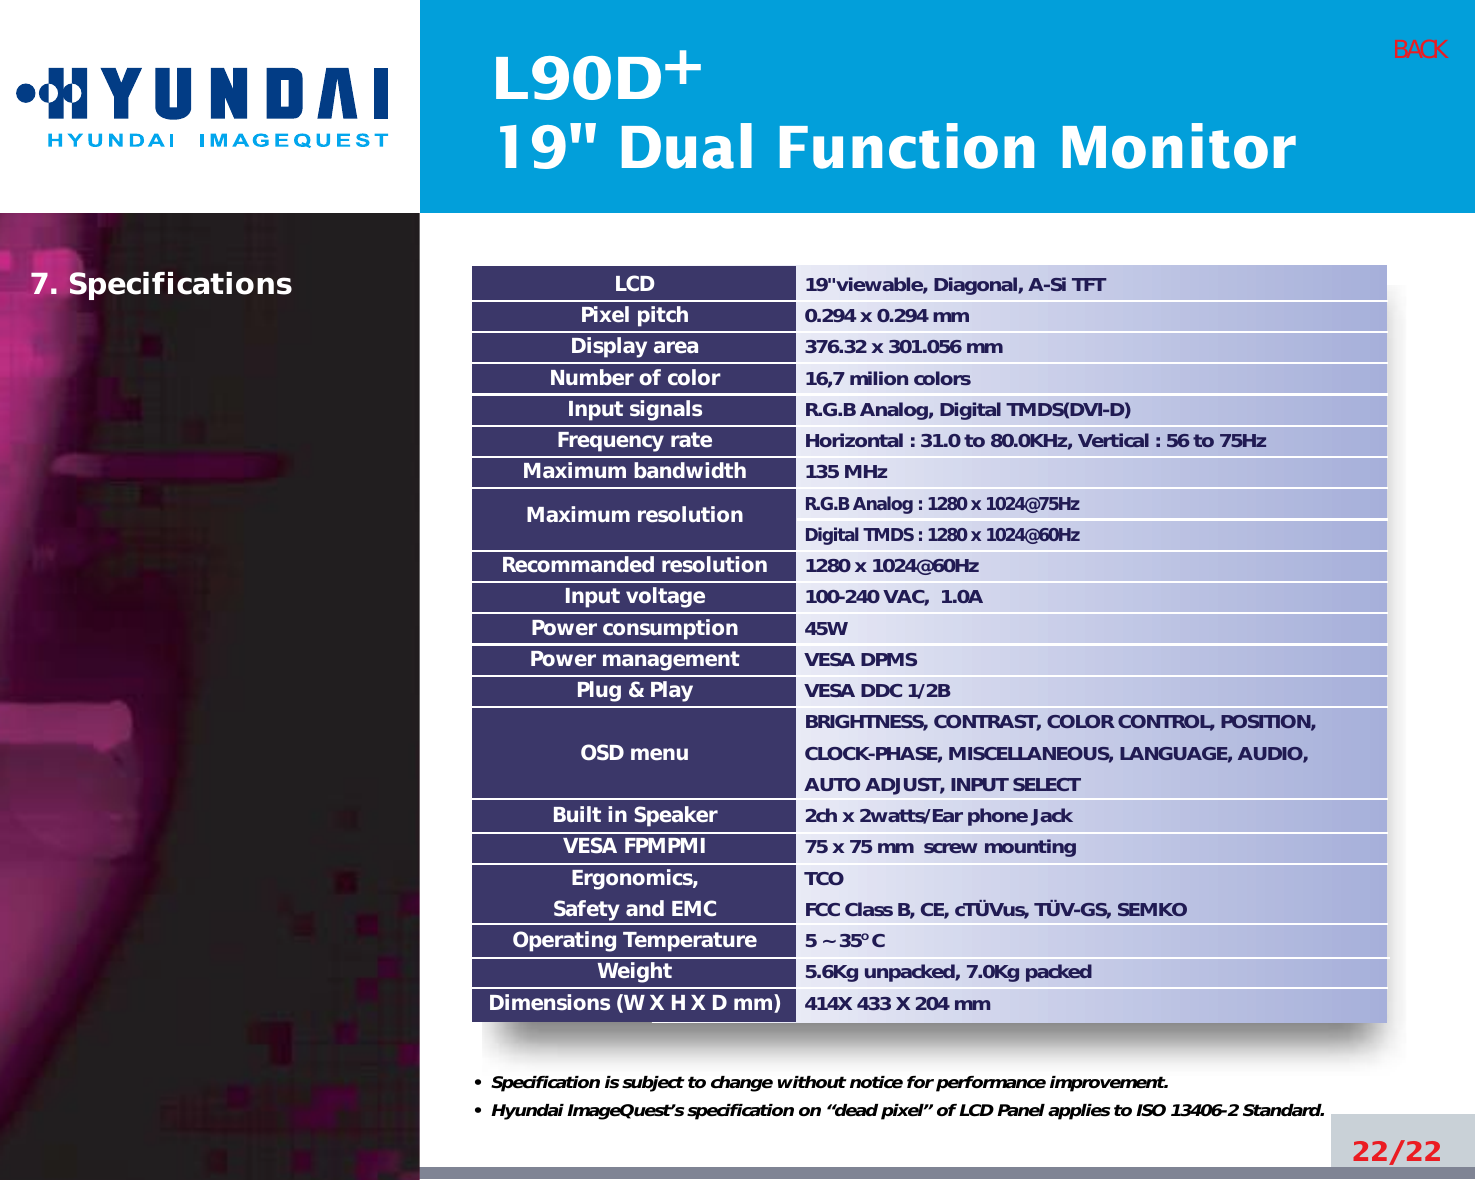 L90D19&quot; Dual Function Monitor+22/22BACK19&quot;viewable, Diagonal, A-Si TFT0.294 x 0.294 mm376.32 x 301.056 mm16,7 milion colorsR.G.B Analog, Digital TMDS(DVI-D)Horizontal : 31.0 to 80.0KHz, Vertical : 56 to 75Hz135 MHzR.G.B Analog : 1280 x 1024@75Hz  Digital TMDS : 1280 x 1024@60Hz1280 x 1024@60Hz100-240 VAC,  1.0A45WVESA DPMSVESA DDC 1/2BBRIGHTNESS, CONTRAST, COLOR CONTROL, POSITION, CLOCK-PHASE, MISCELLANEOUS, LANGUAGE, AUDIO,AUTO ADJUST, INPUT SELECT2ch x 2watts/Ear phone Jack75 x 75 mm  screw mountingTCO FCC Class B, CE, cTÜVus, TÜV-GS, SEMKO5 ~ 35O C5.6Kg unpacked, 7.0Kg packed414X 433 X 204 mmLCDPixel pitchDisplay areaNumber of colorInput signalsFrequency rateMaximum bandwidthMaximum resolutionRecommanded resolutionInput voltagePower consumptionPower managementPlug &amp; PlayOSD menuBuilt in SpeakerVESA FPMPMIErgonomics,Safety and EMCOperating TemperatureWeightDimensions (W X H X D mm)7. Specifications•  Specification is subject to change without notice for performance improvement.•  Hyundai ImageQuest’s specification on “dead pixel” of LCD Panel applies to ISO 13406-2 Standard.